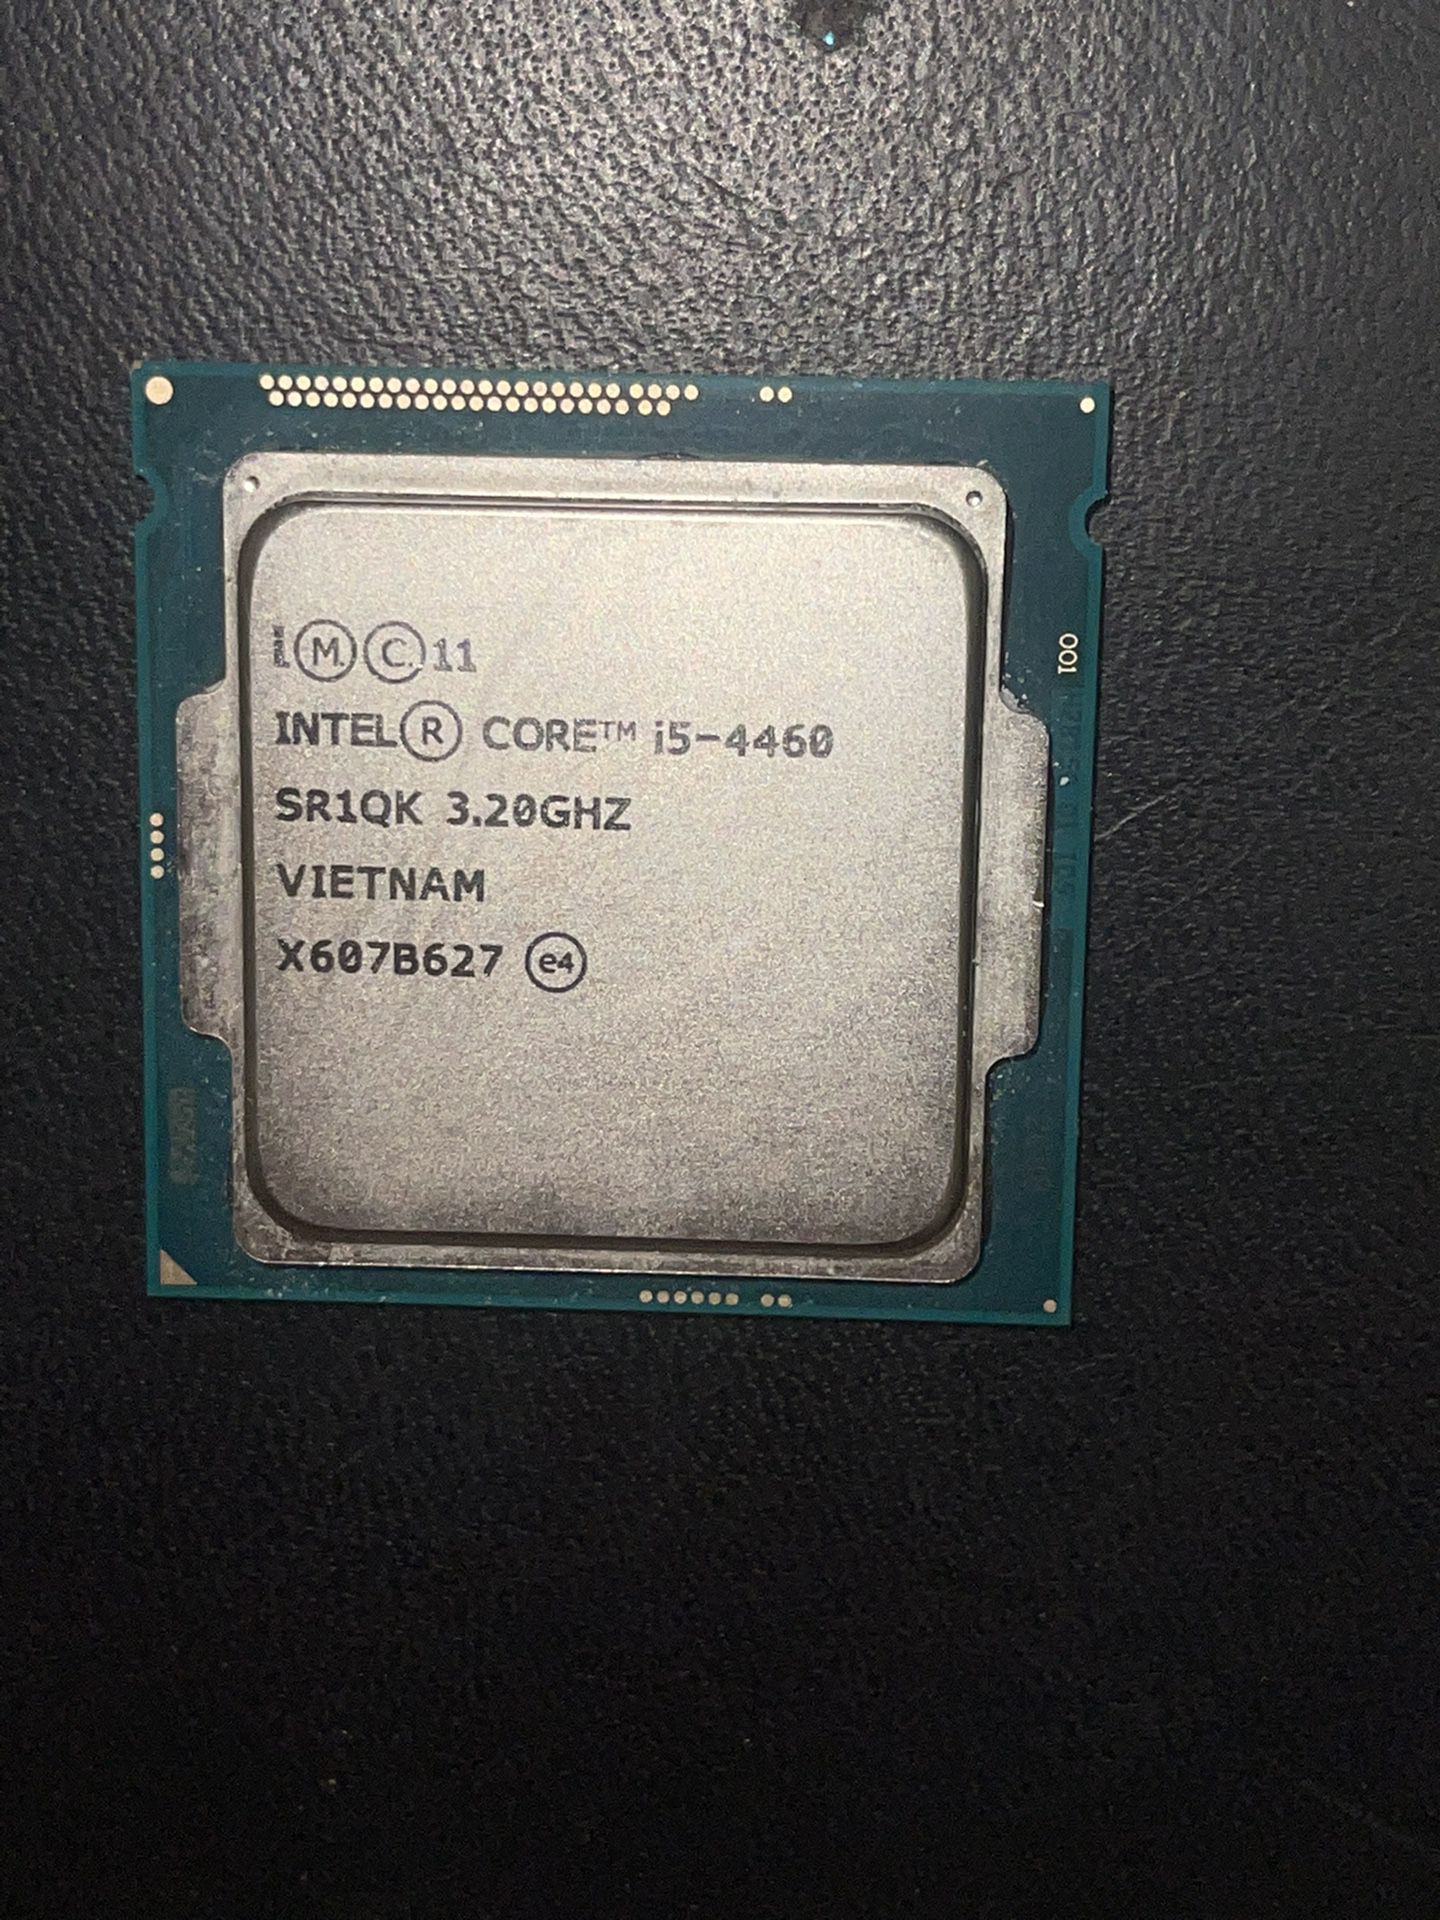 CPU Intel I5- 4460 3.20GHZ for Sale in New York, NY - OfferUp